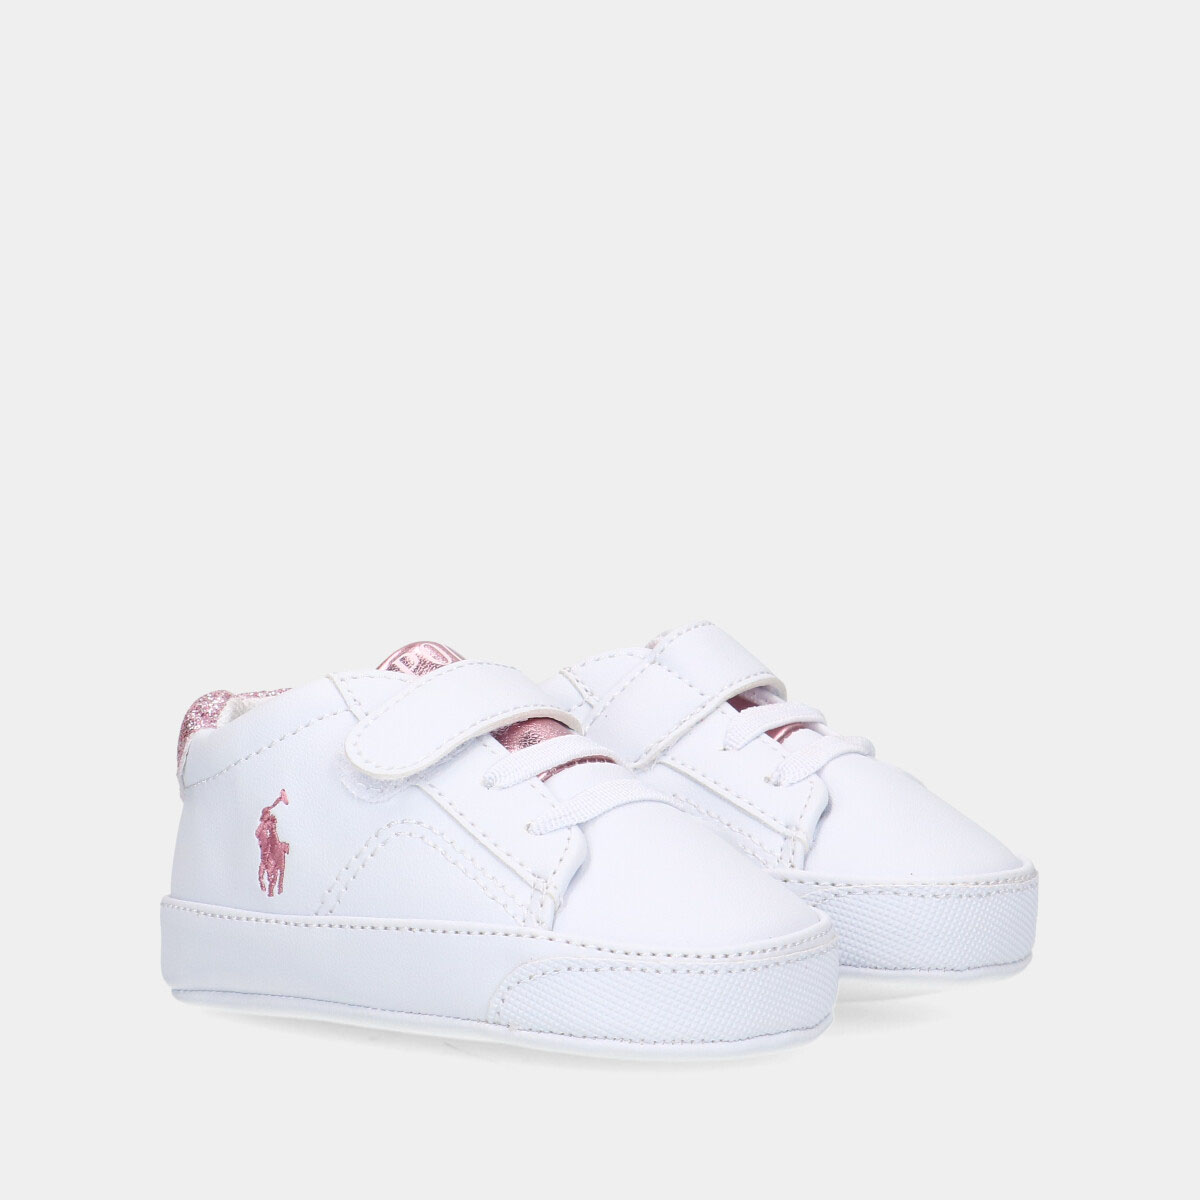 Polo Ralph Lauren Theron V Ps Layette White / Pink Glitter baby sneakers
